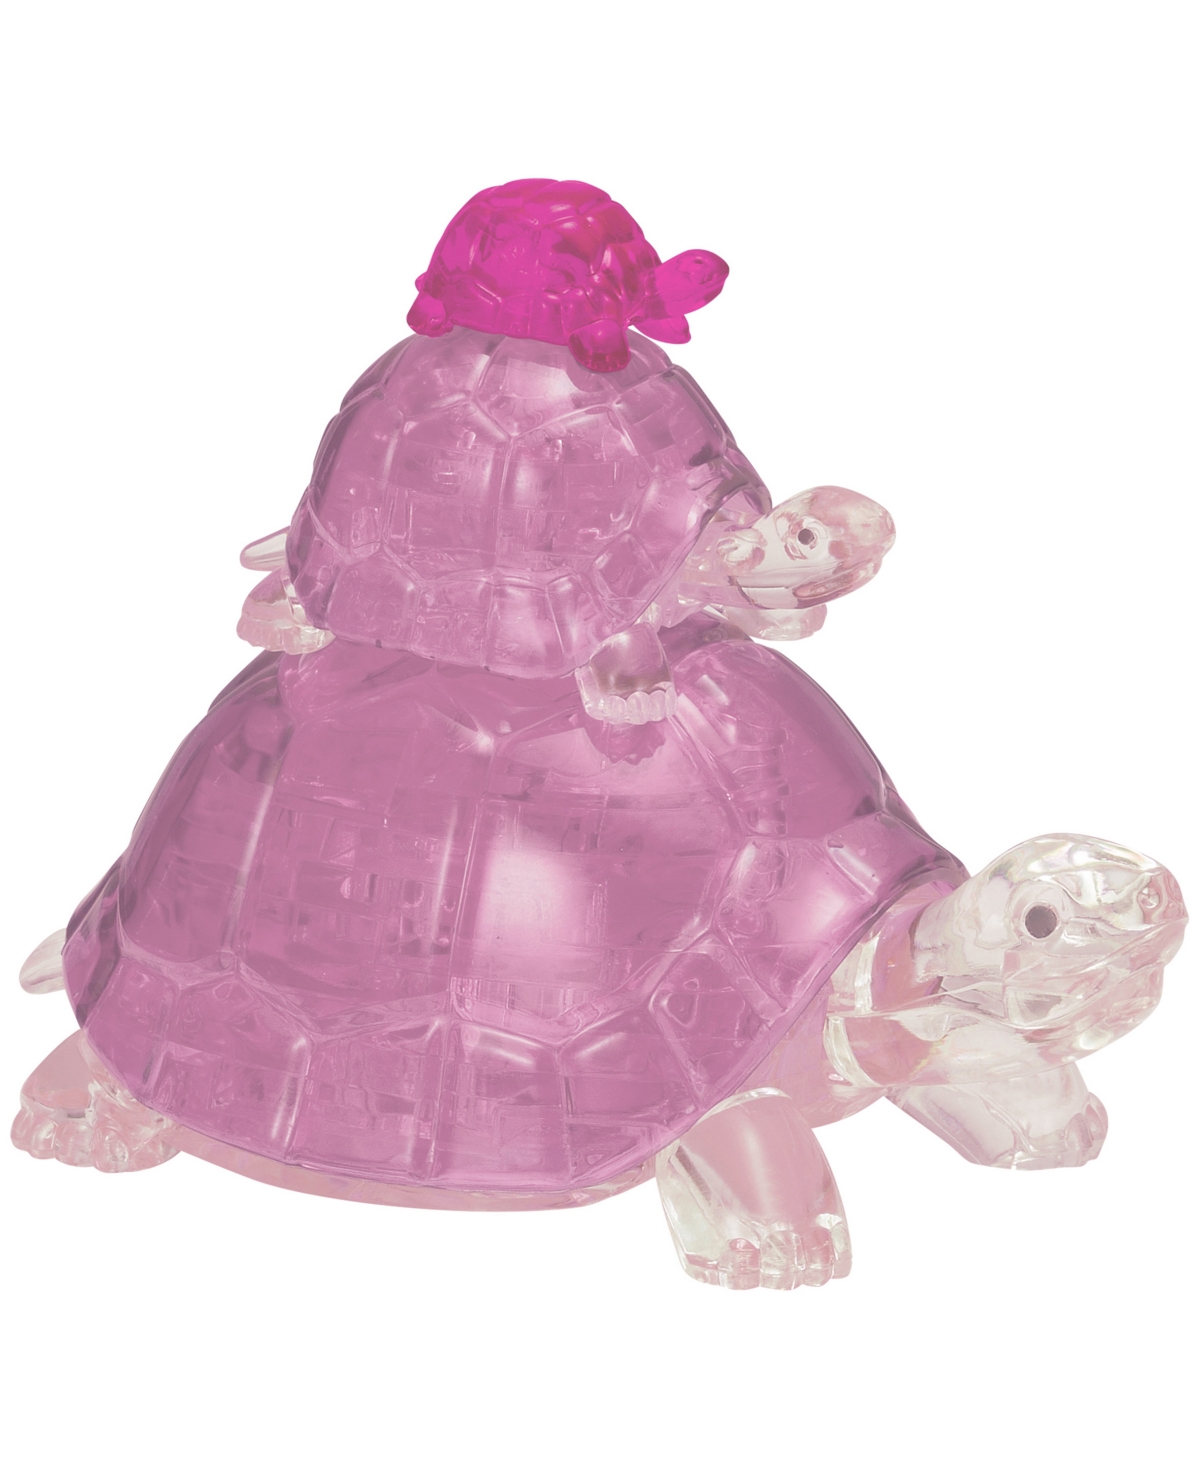 University Games Kids' Bepuzzled 3d Crystal Puzzle Turtles, 37 Pieces In No Color